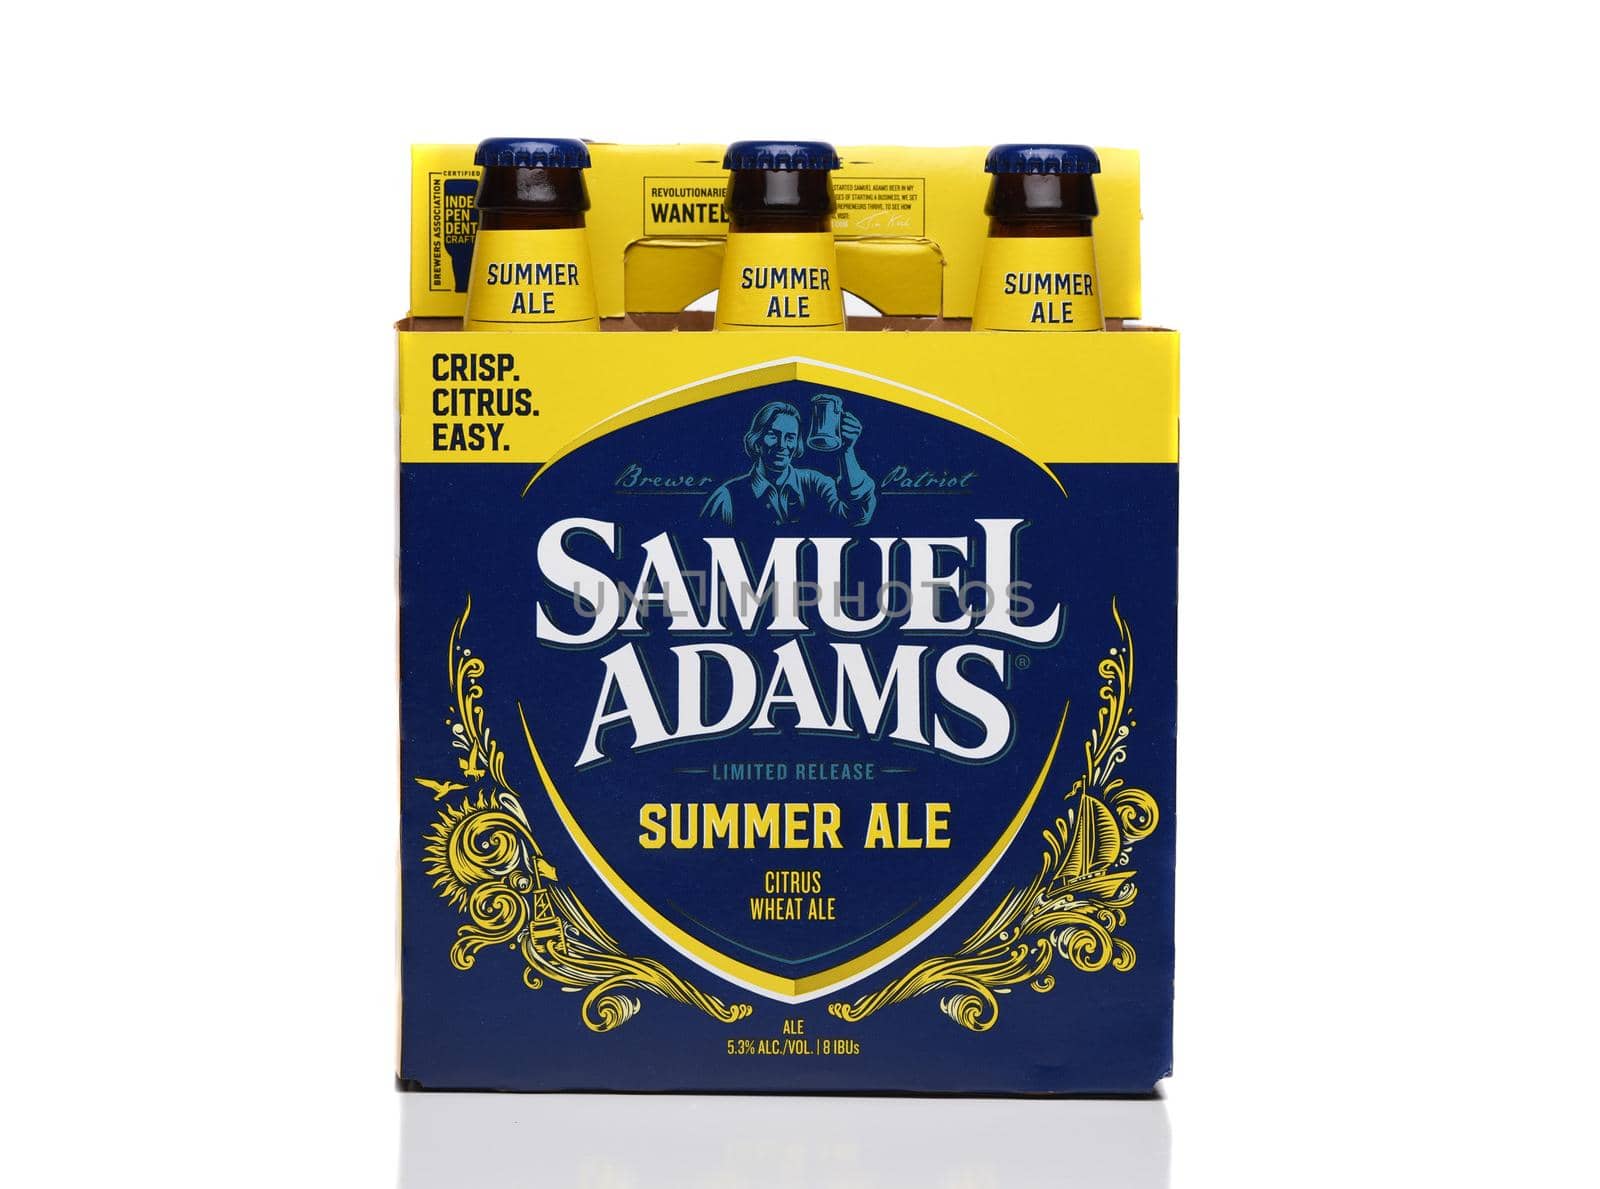 IRVINE, CALIFORNIA - 09 AUG 2020: A Six Pack of Samuel Adams Summer Ale, side view.